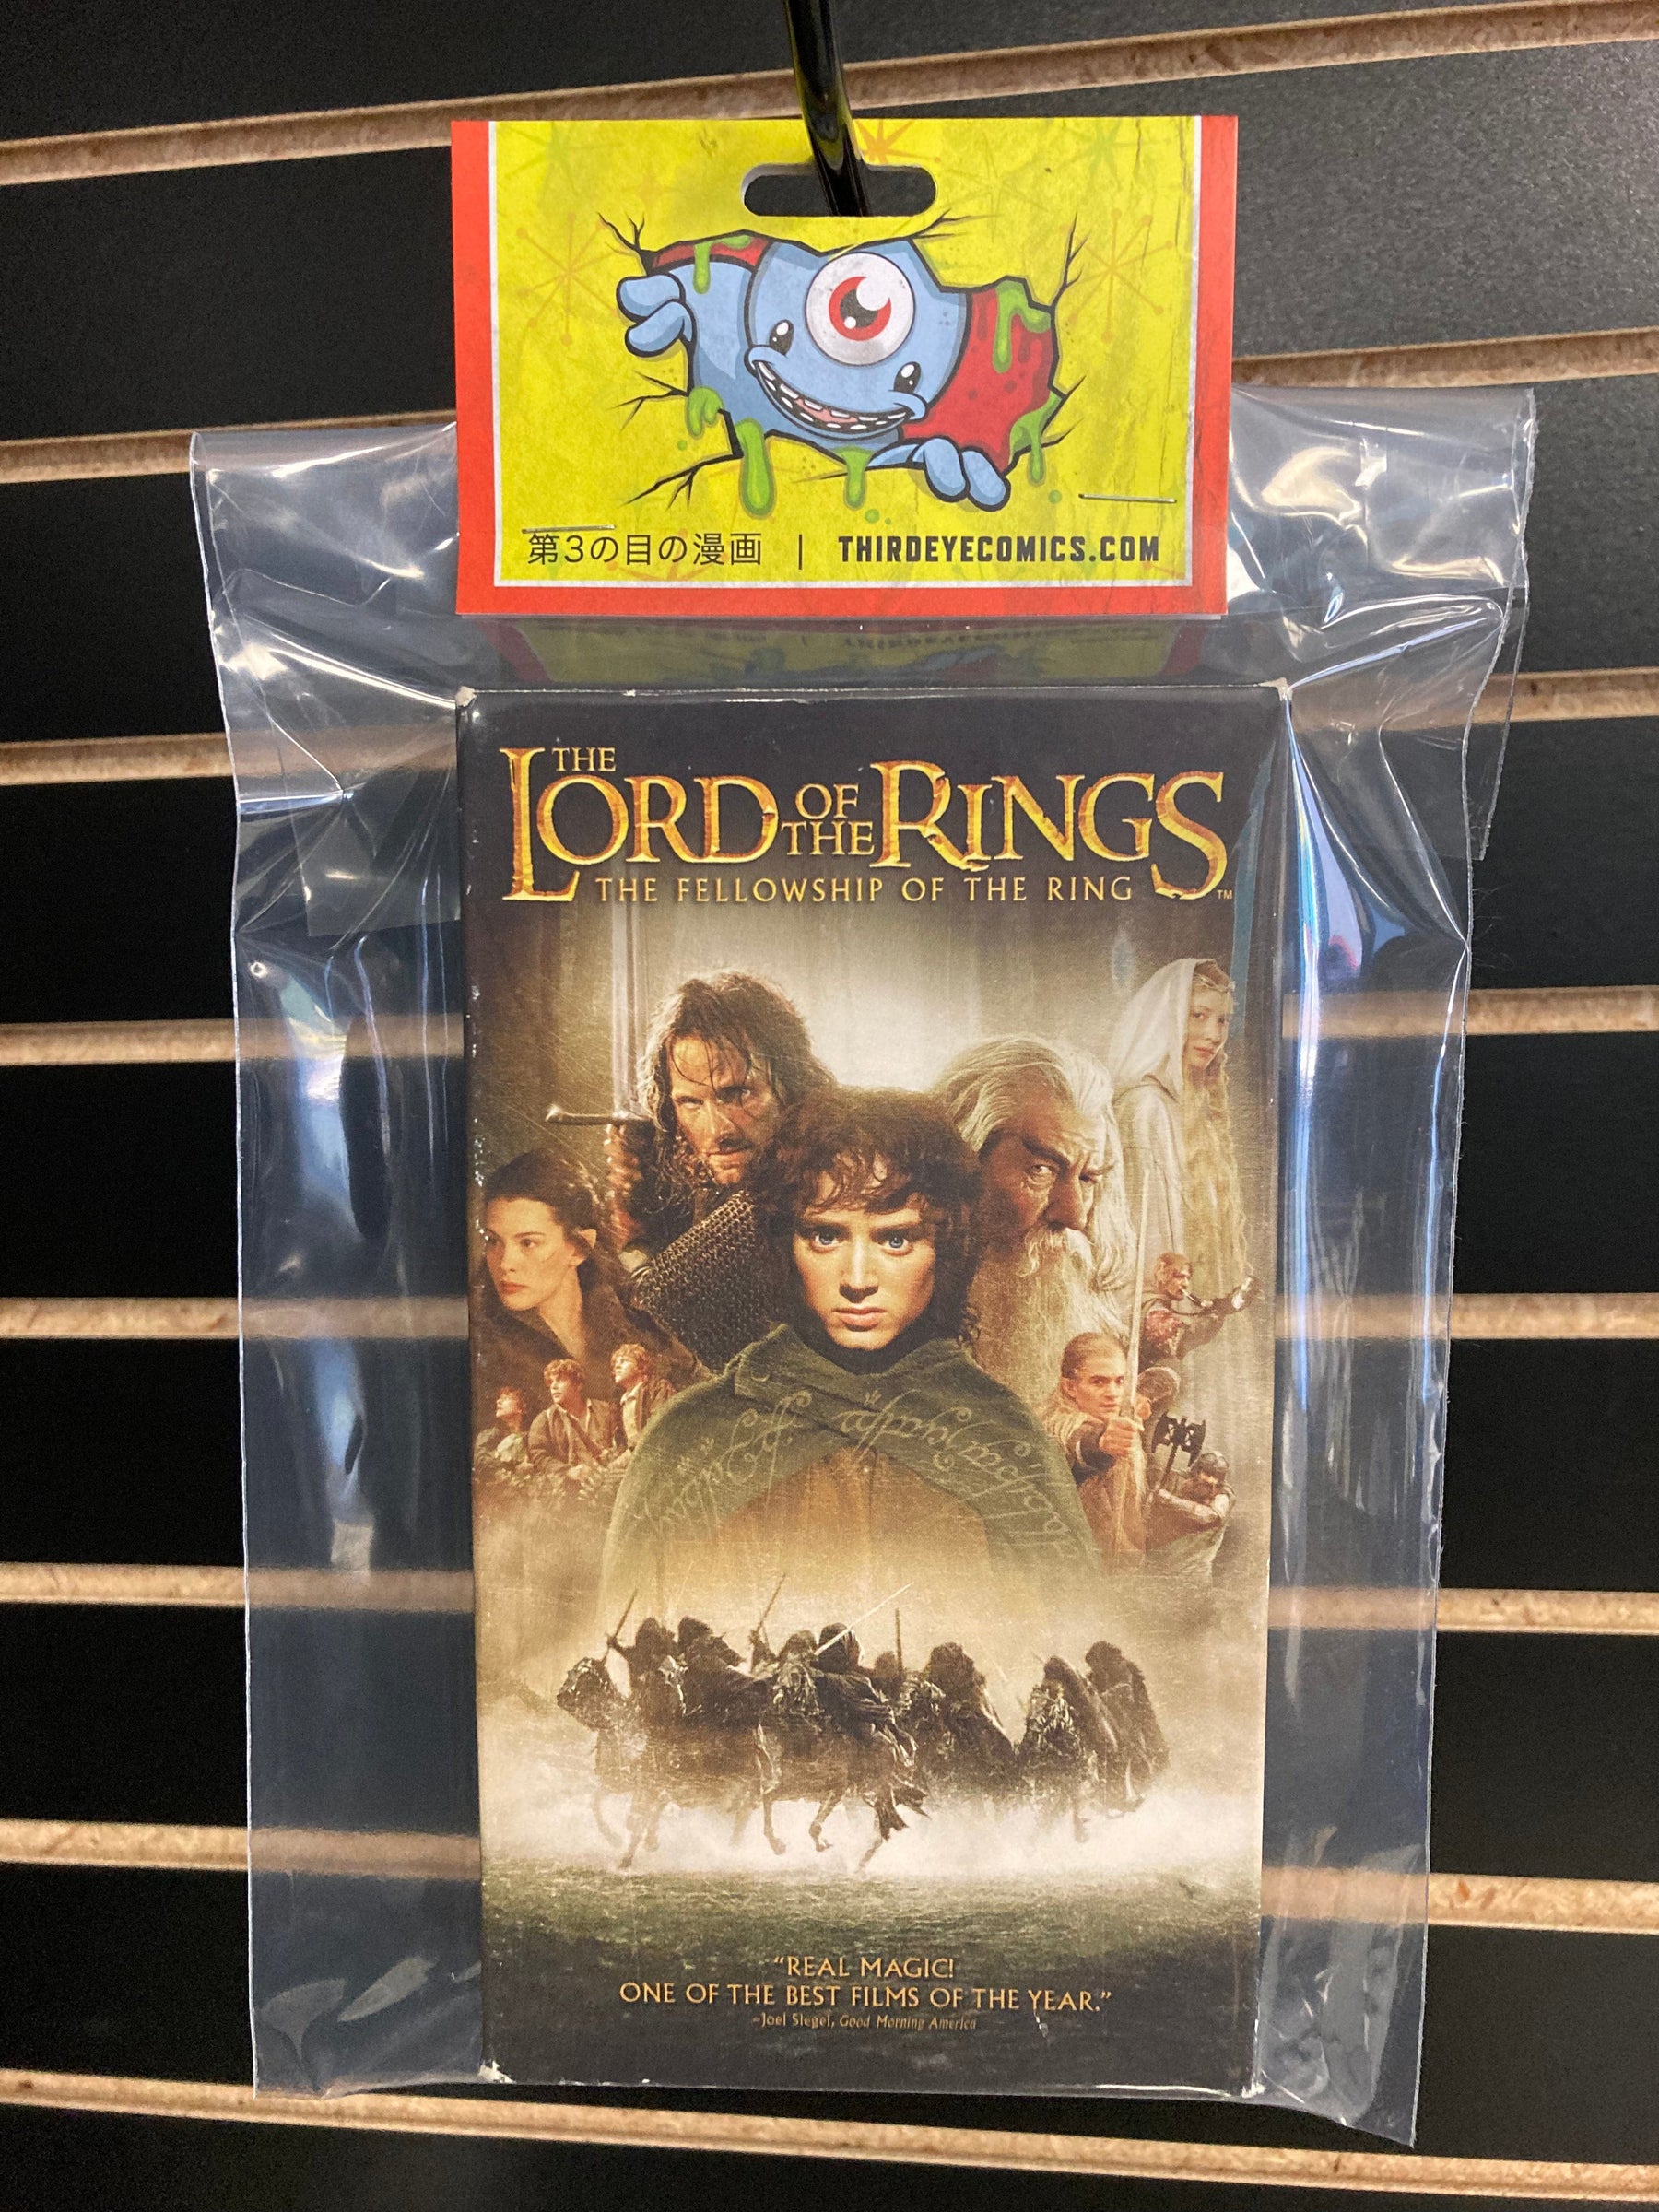 VHS: The Lord of the Rings - The Fellowship of the Ring - Third Eye